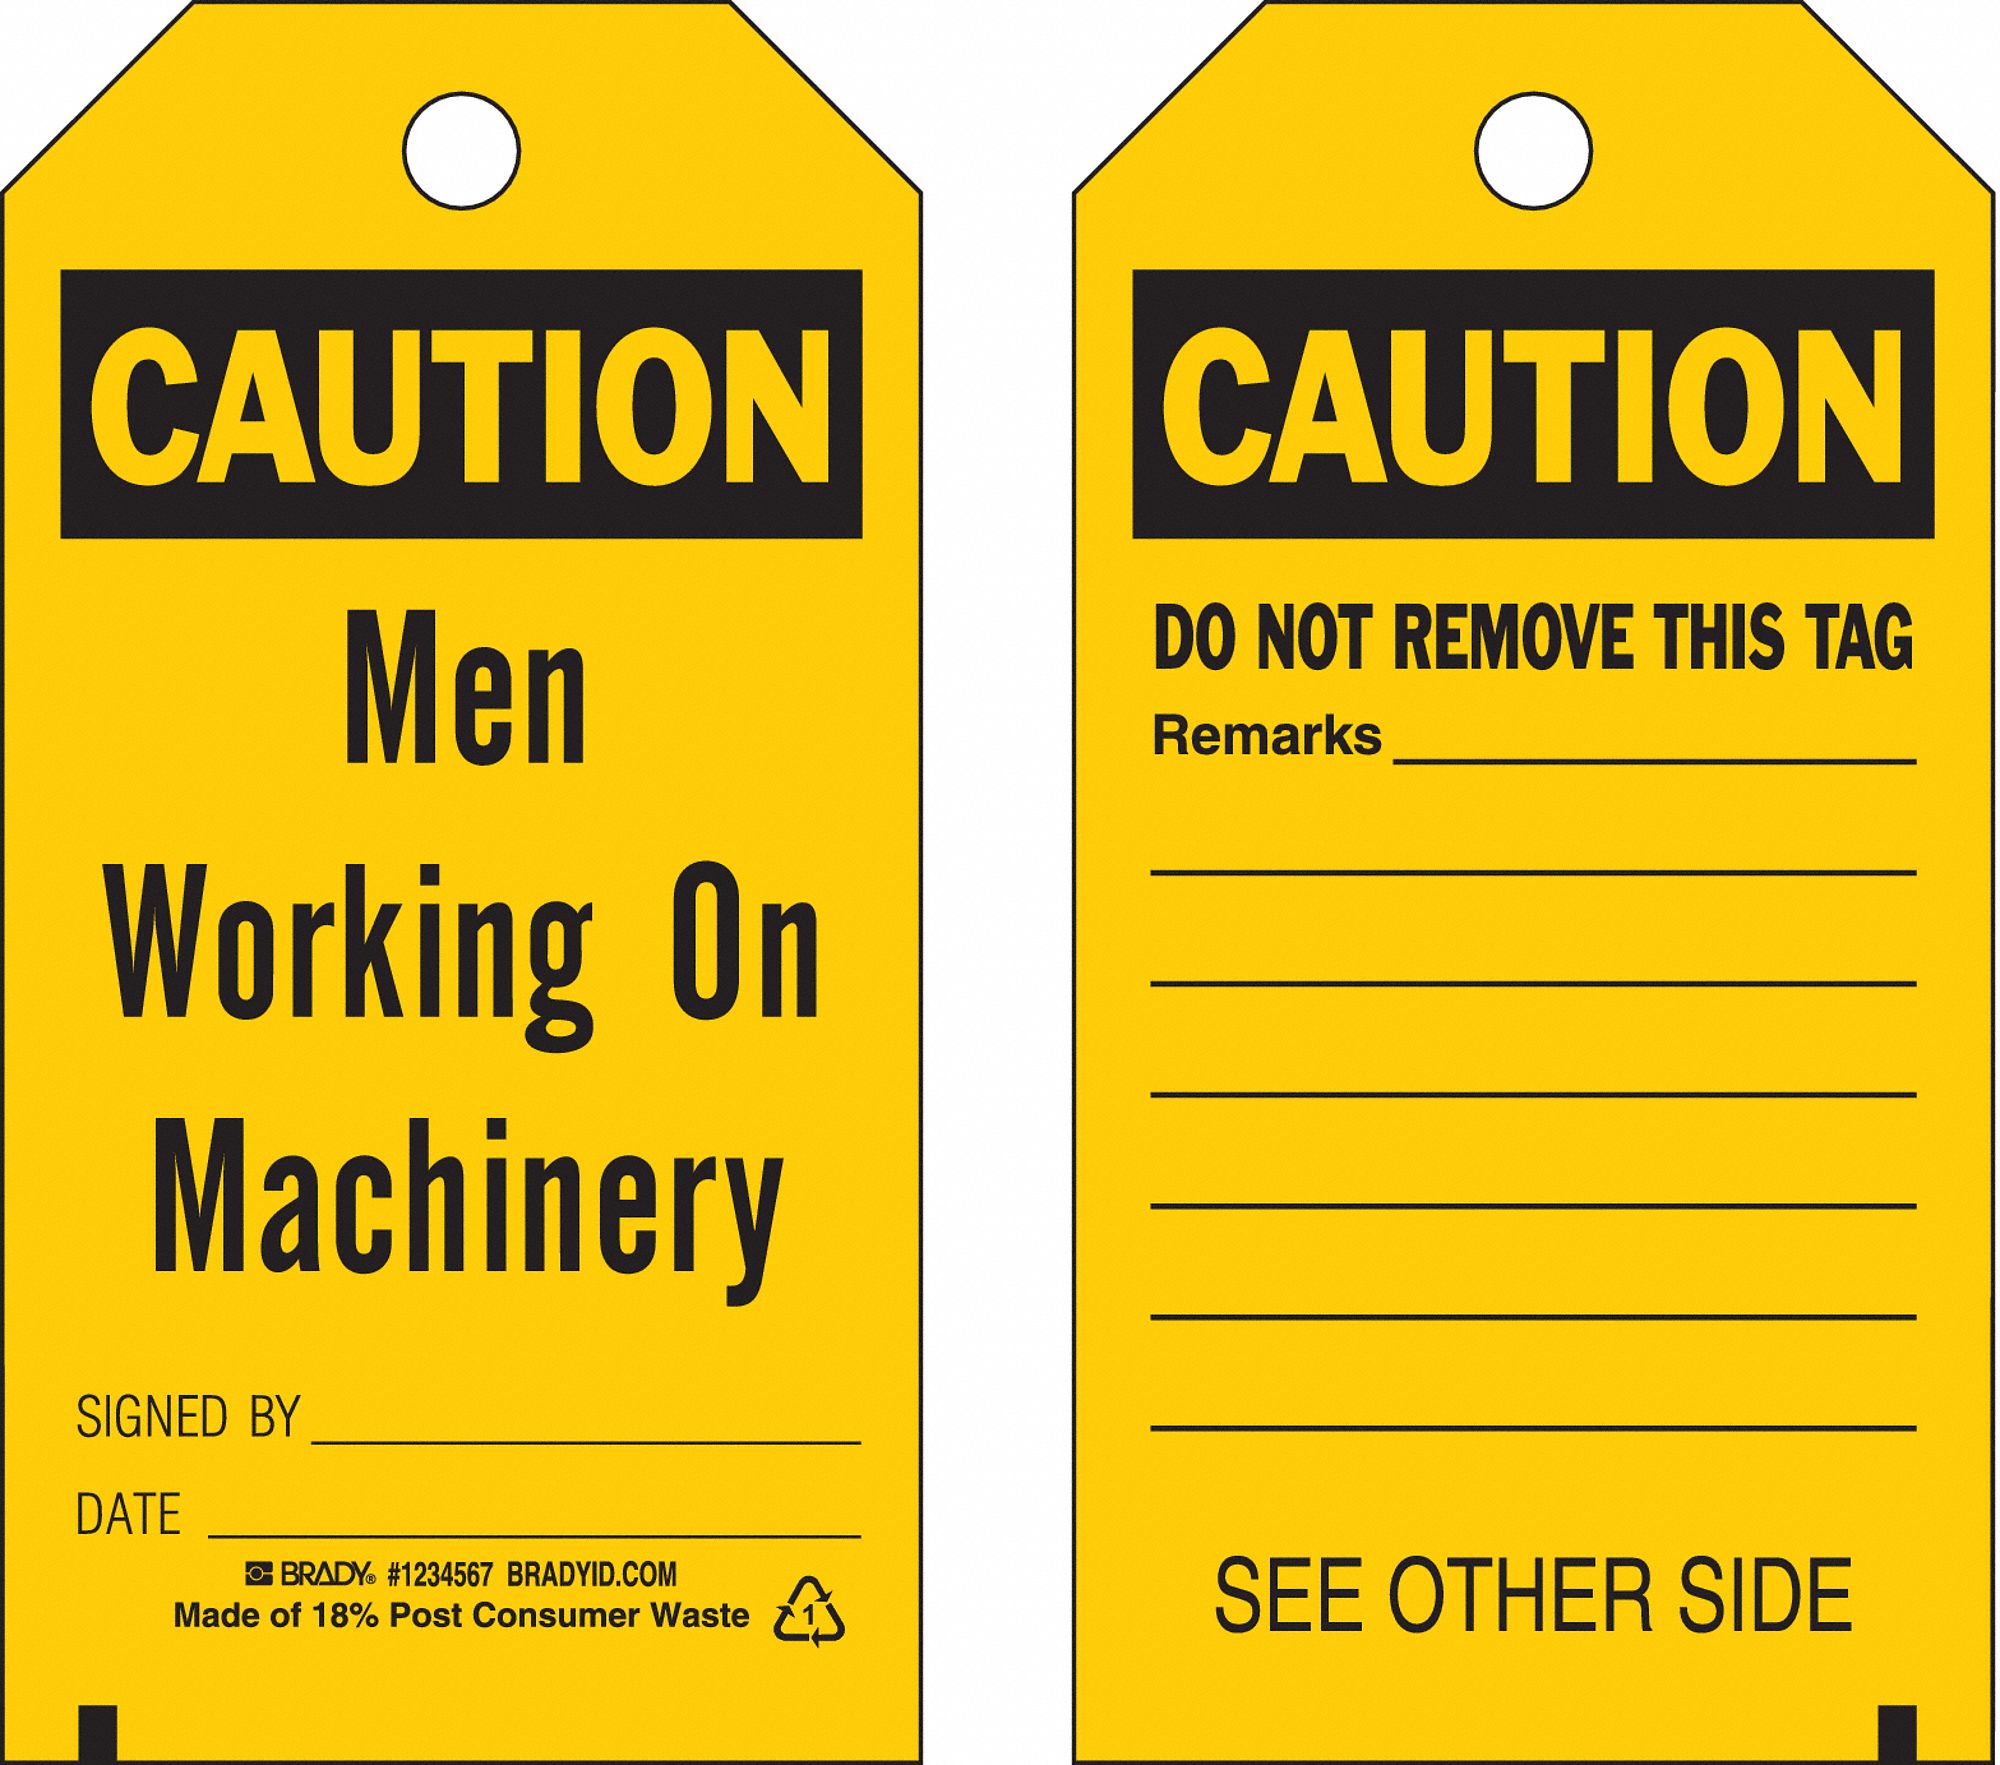 Economy PolyesterMen Working On Machinery, Caution Tag 5-3/4